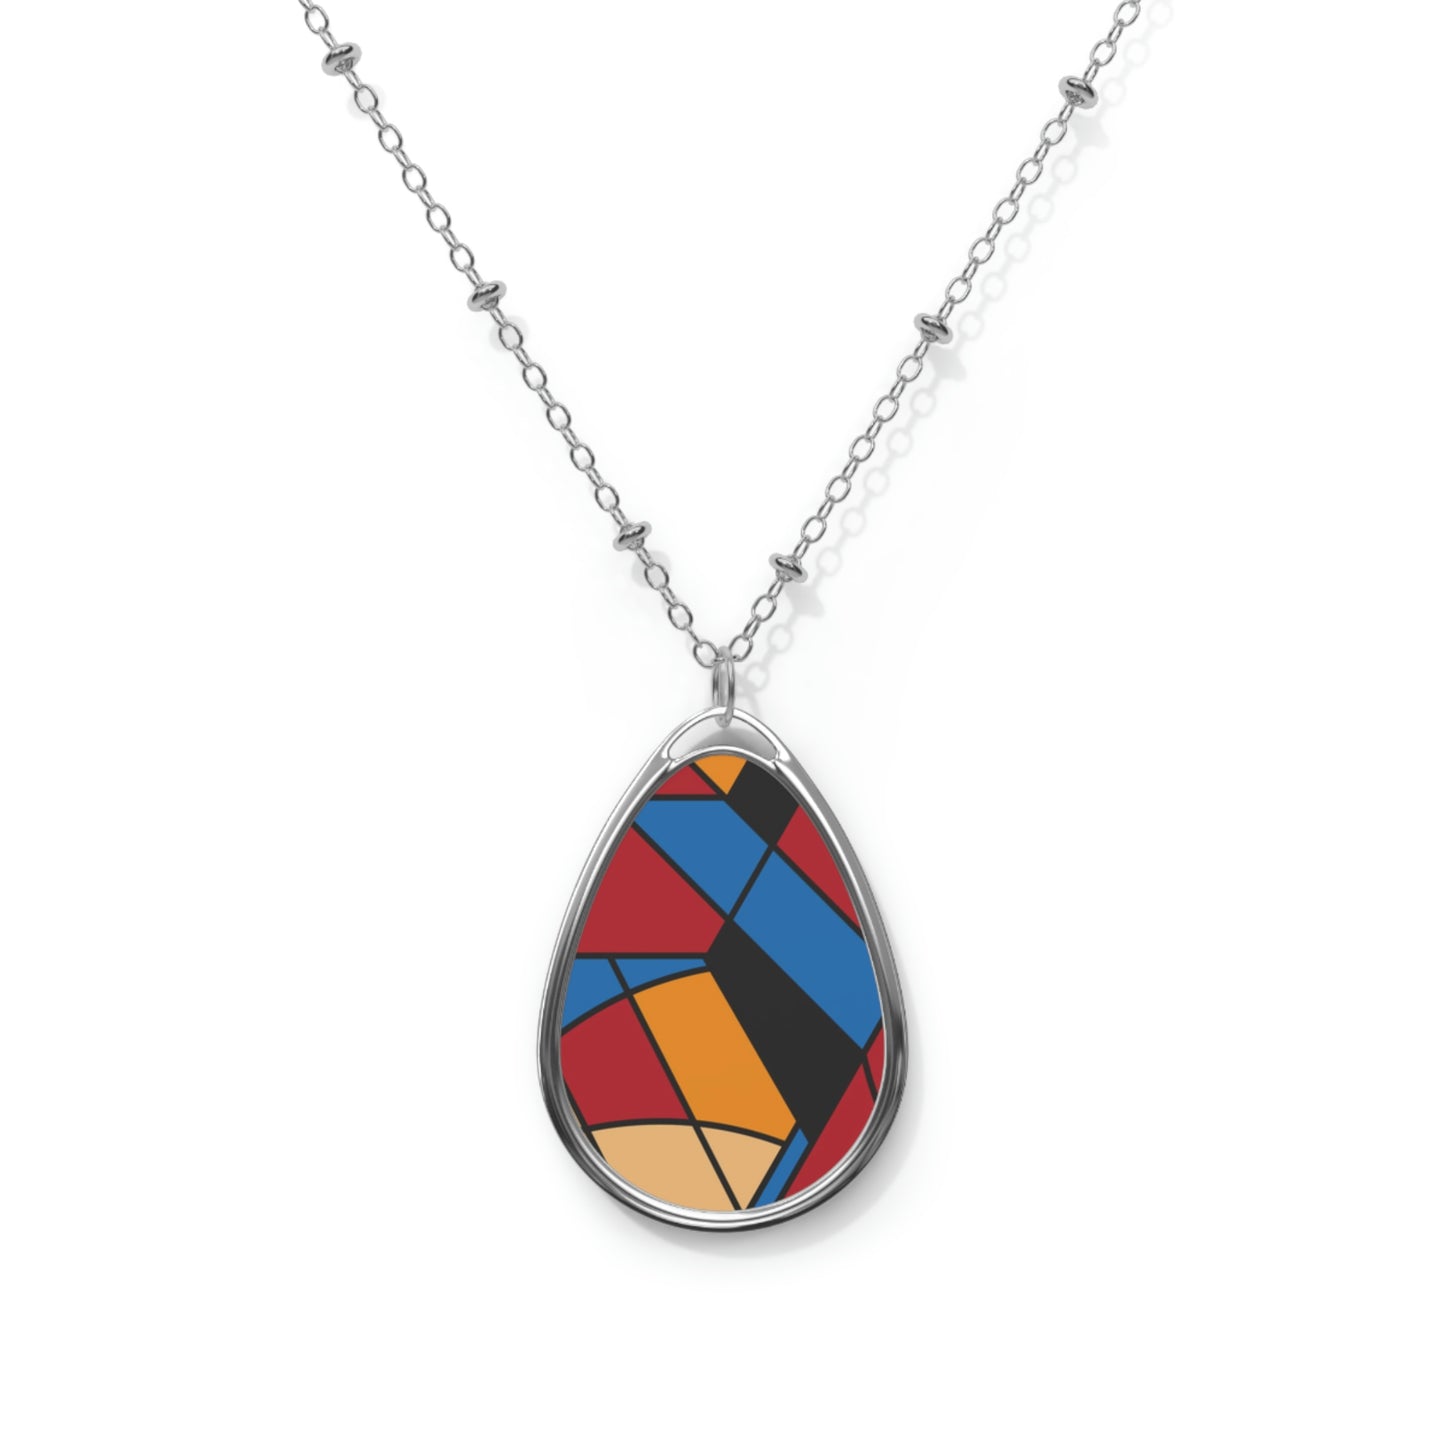 Personalized jewerly - Oval Necklace with Piet Mondrian design